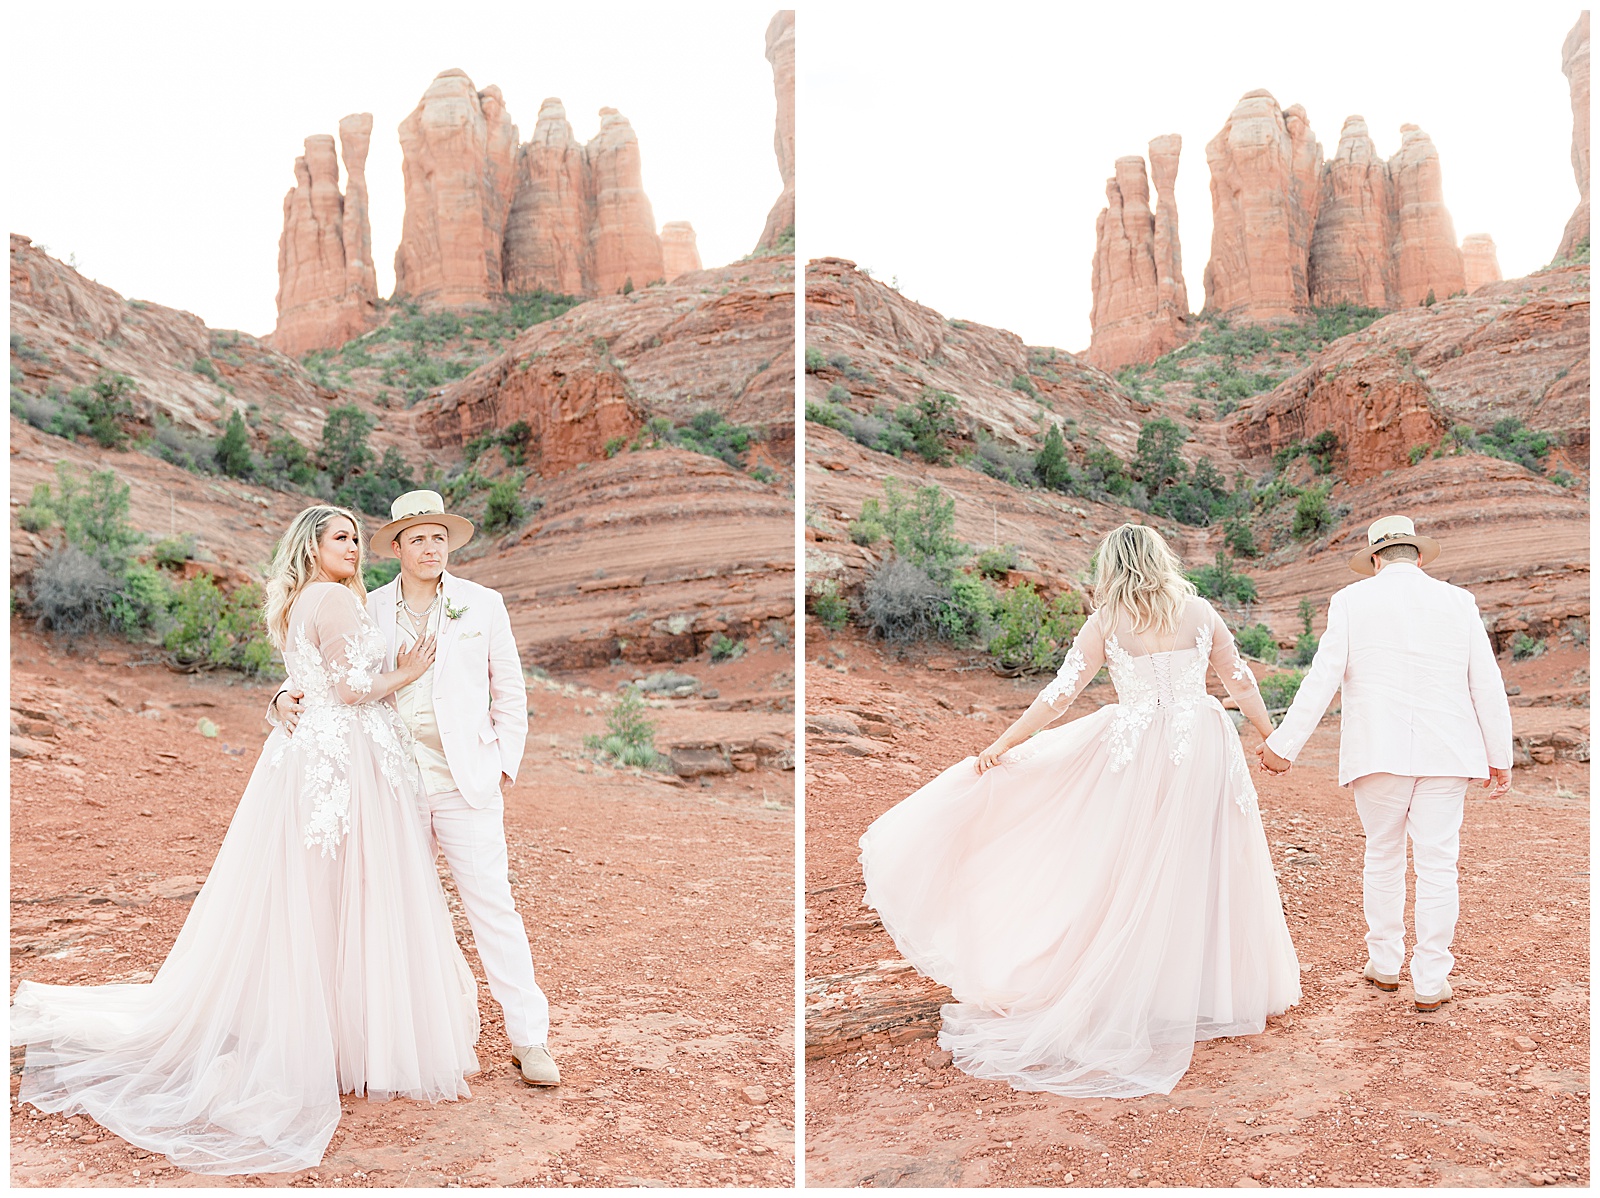 Elopement photos of the bride and groom in Sedona